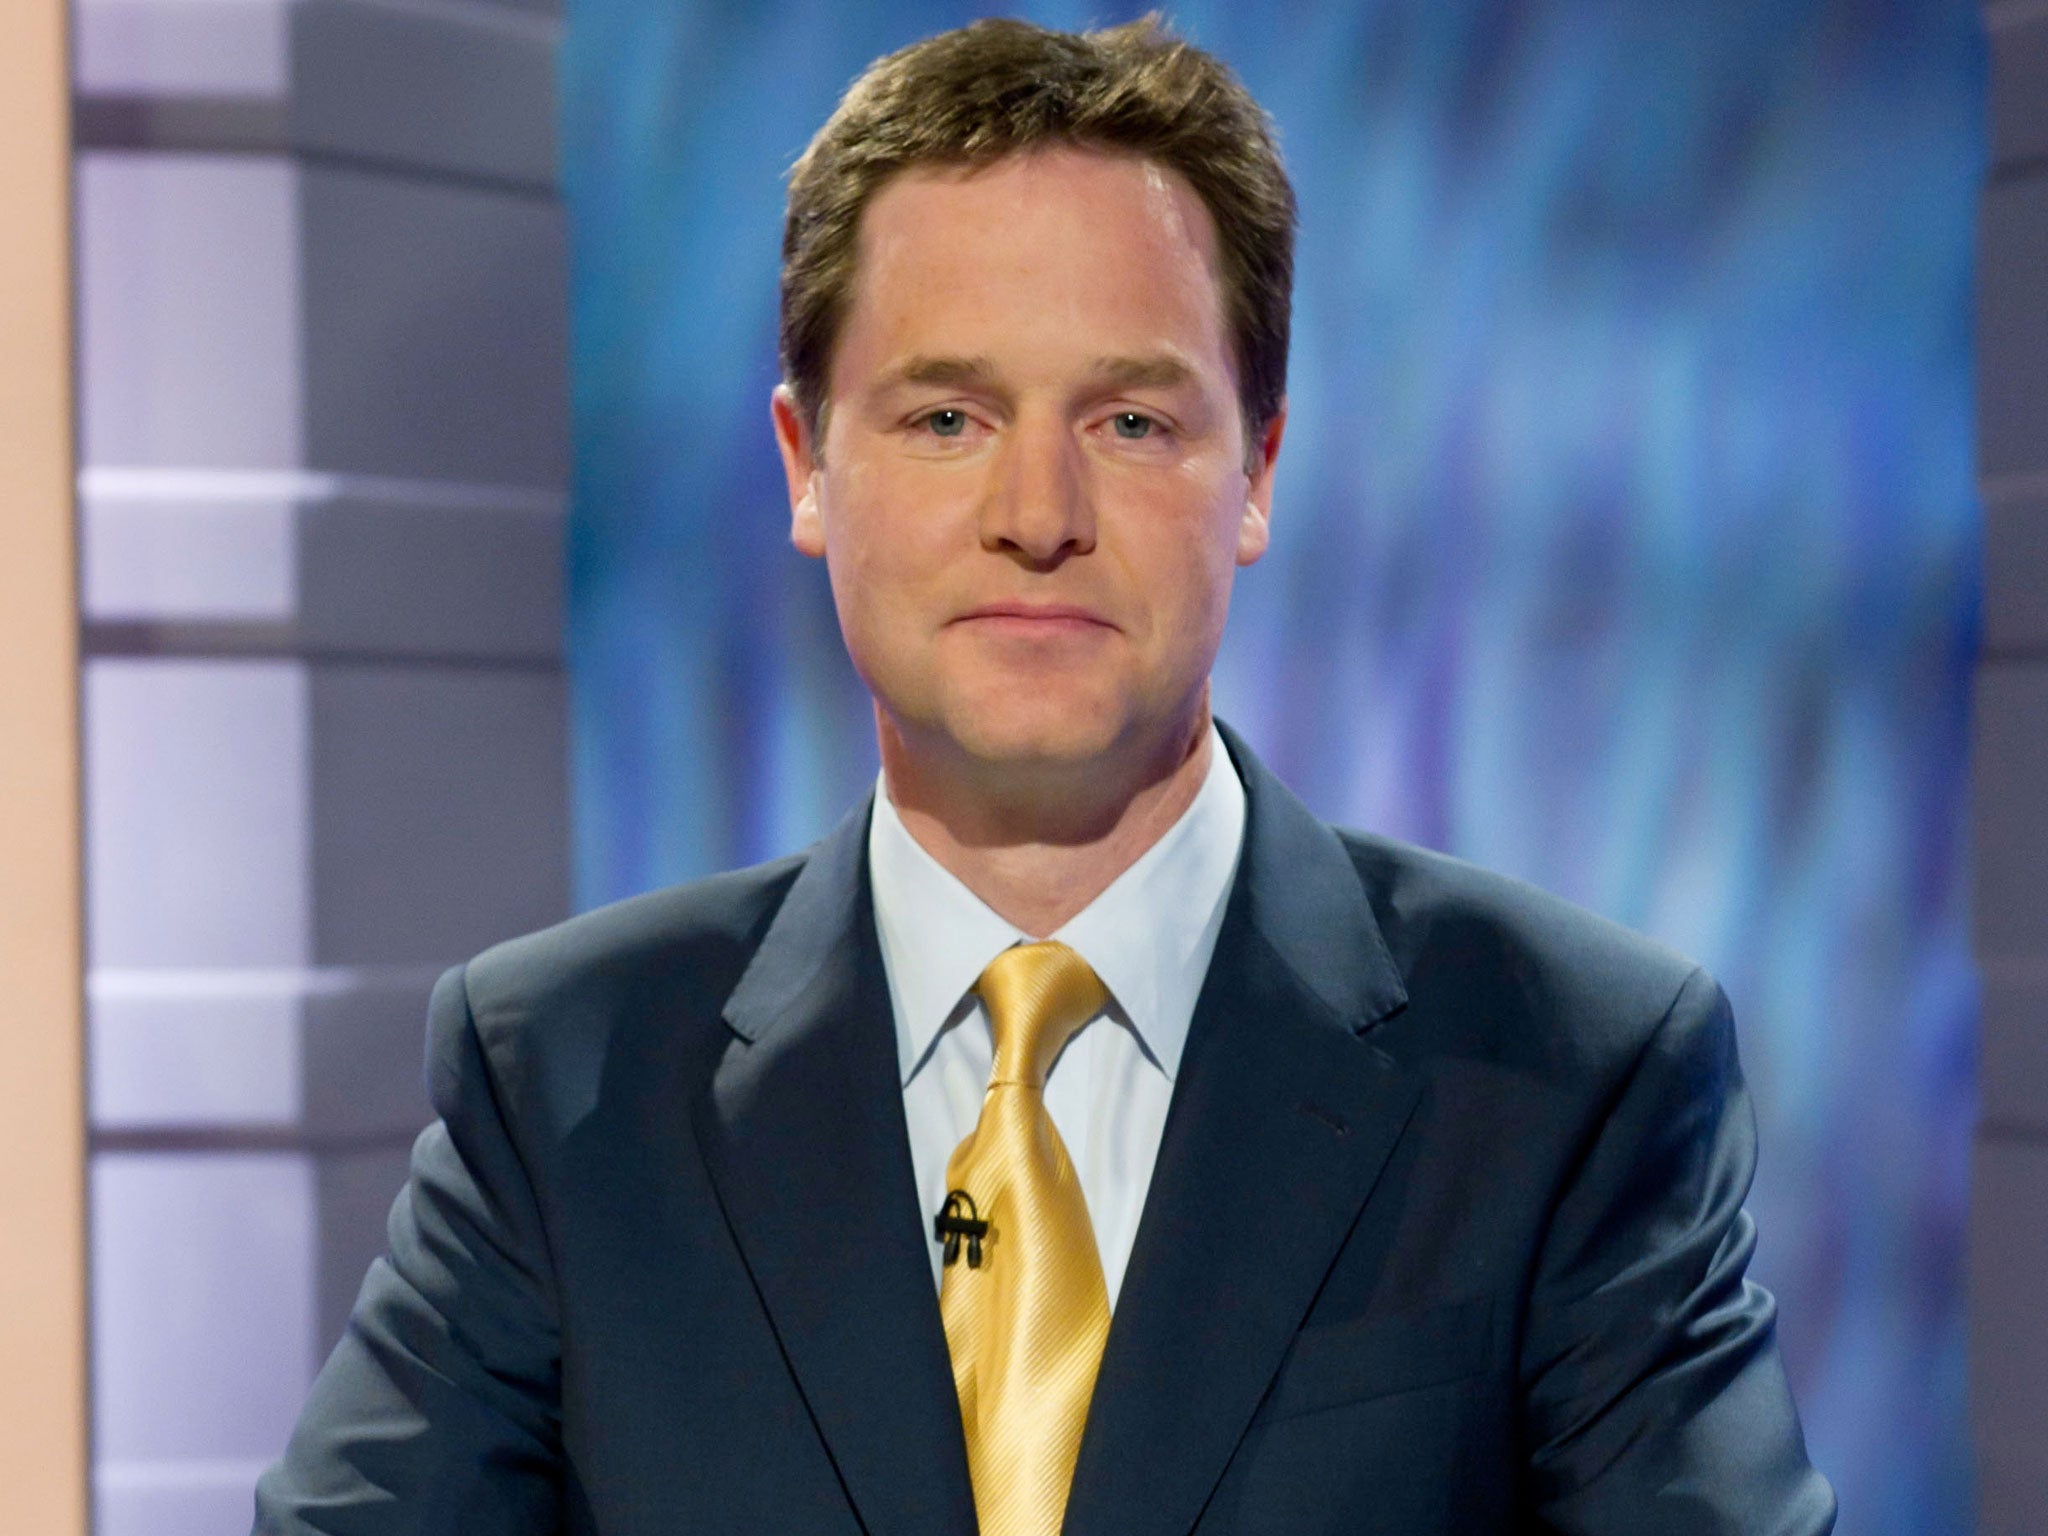 Deputy PM Nick Clegg, pictured here in the run-up to the 2010 Election, has been accused of betraying voters over Lib Dem support for fracking